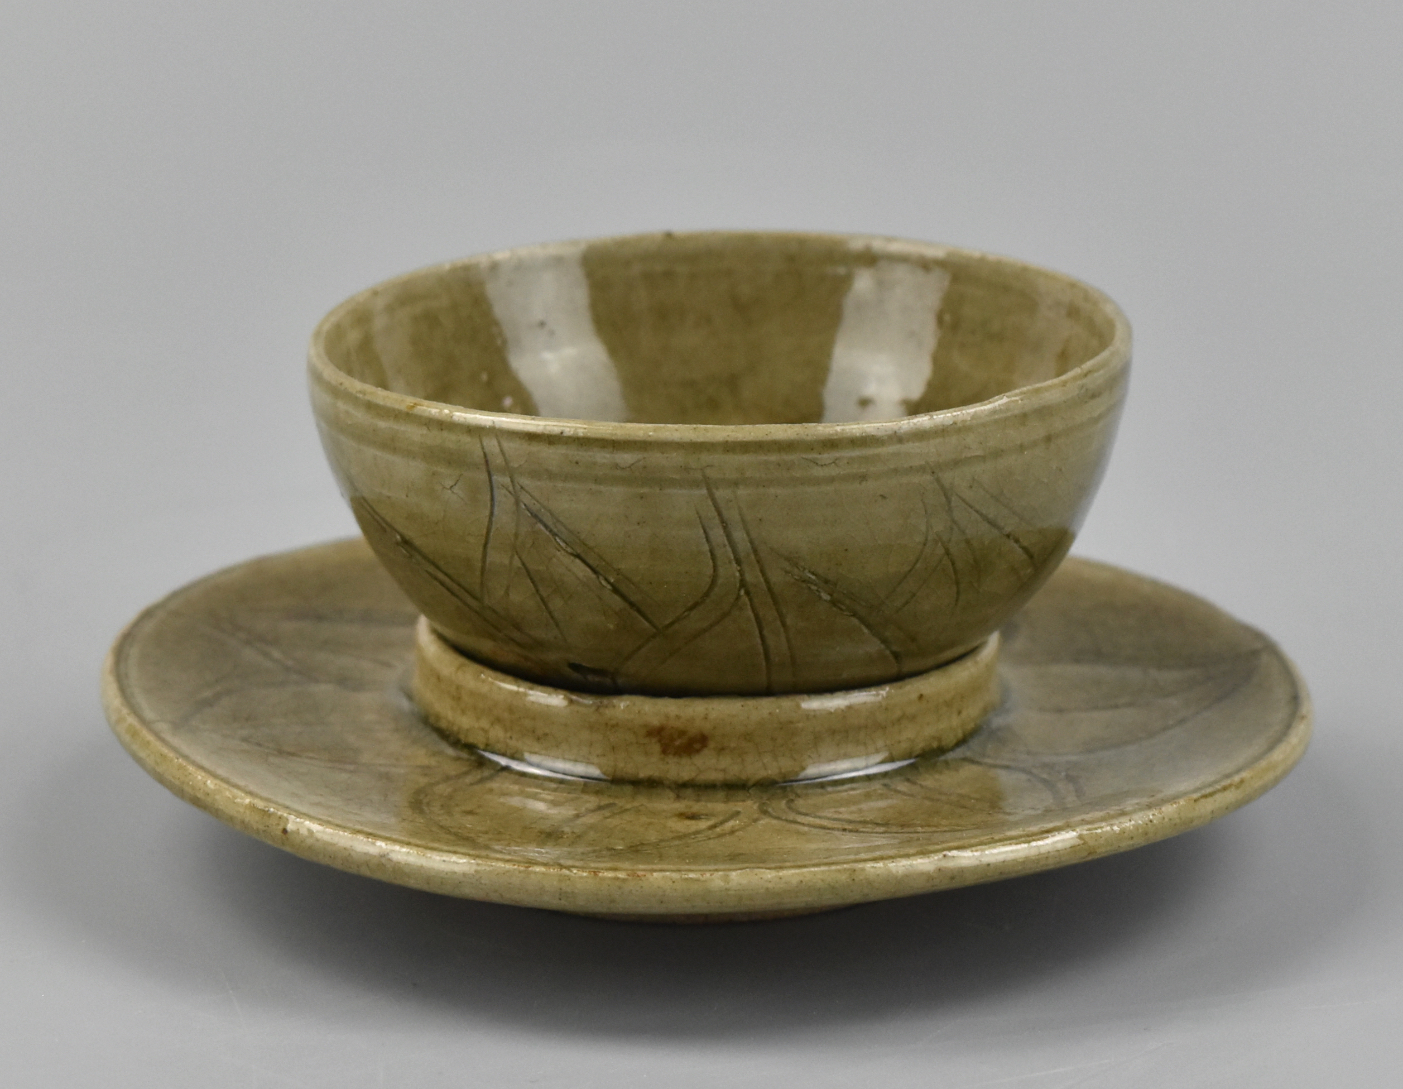 CHINESE YUE WARE CELADON CUP  3019a7